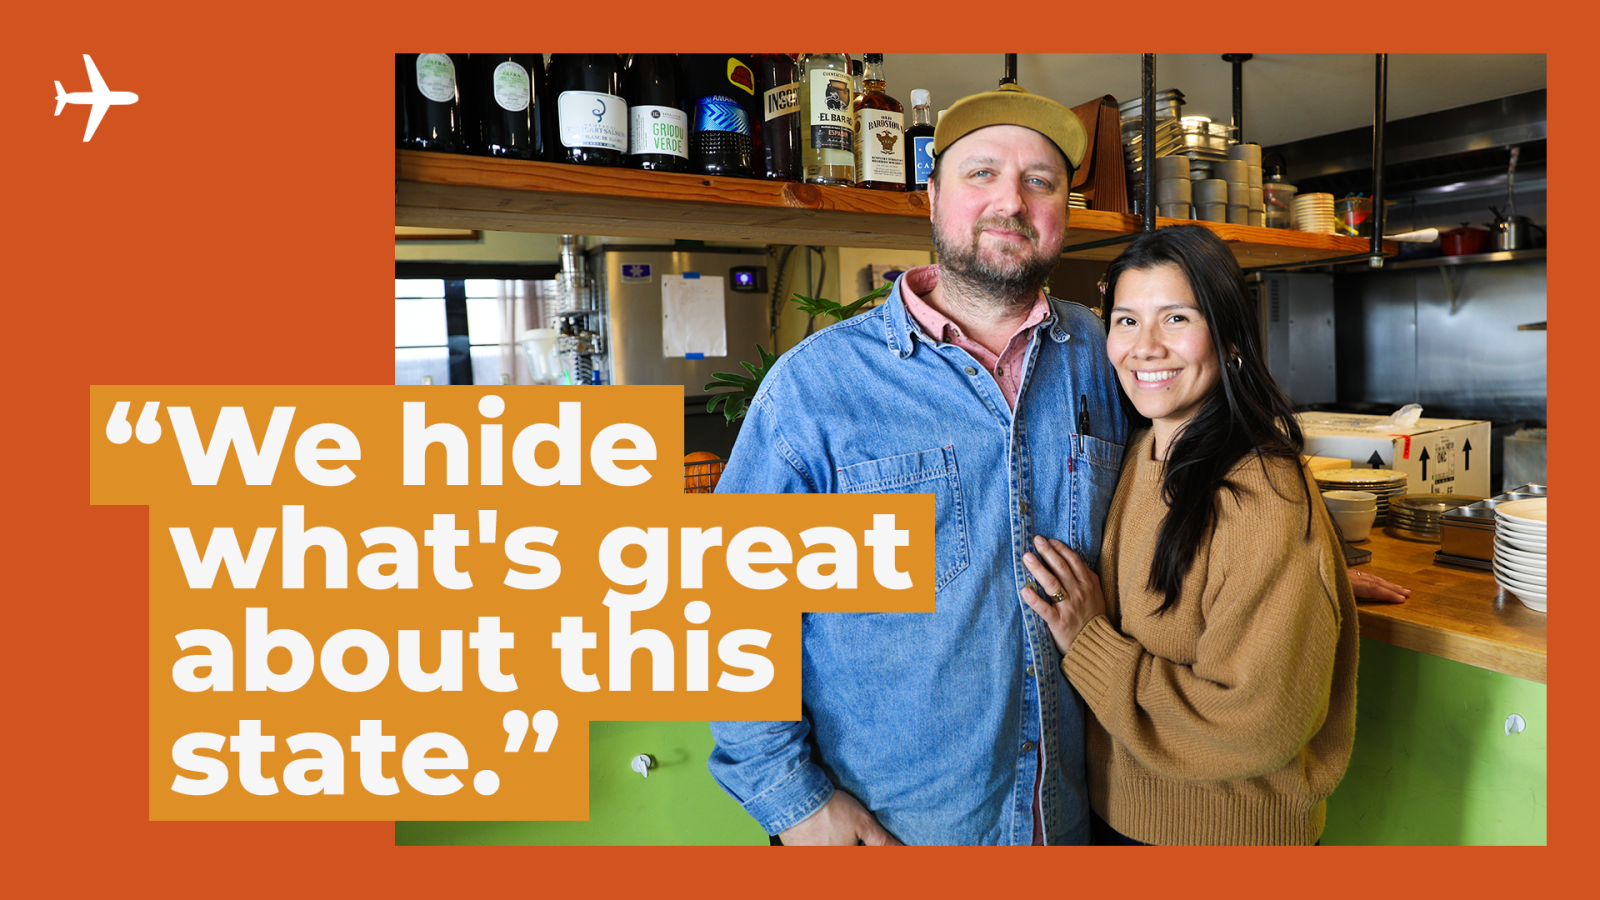 Zach and Silvana standing in their restaurant and with a quote that reads "We hide what's great about this state."